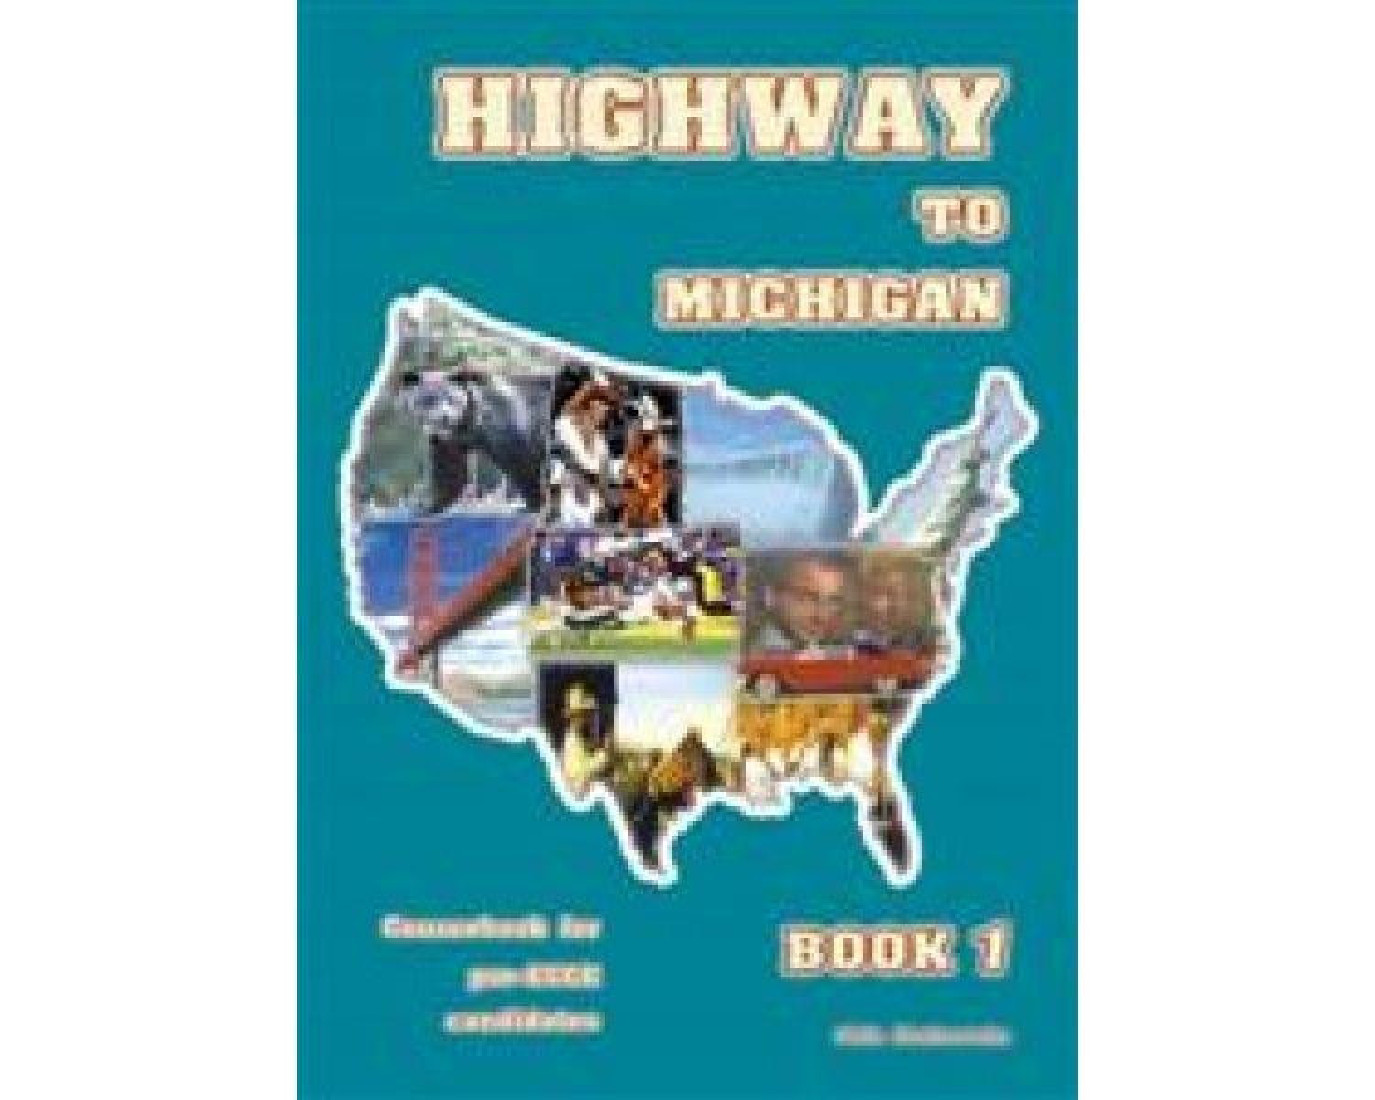 HIGHWAY 1 TO MICHIGAN STUDENTS BOOK